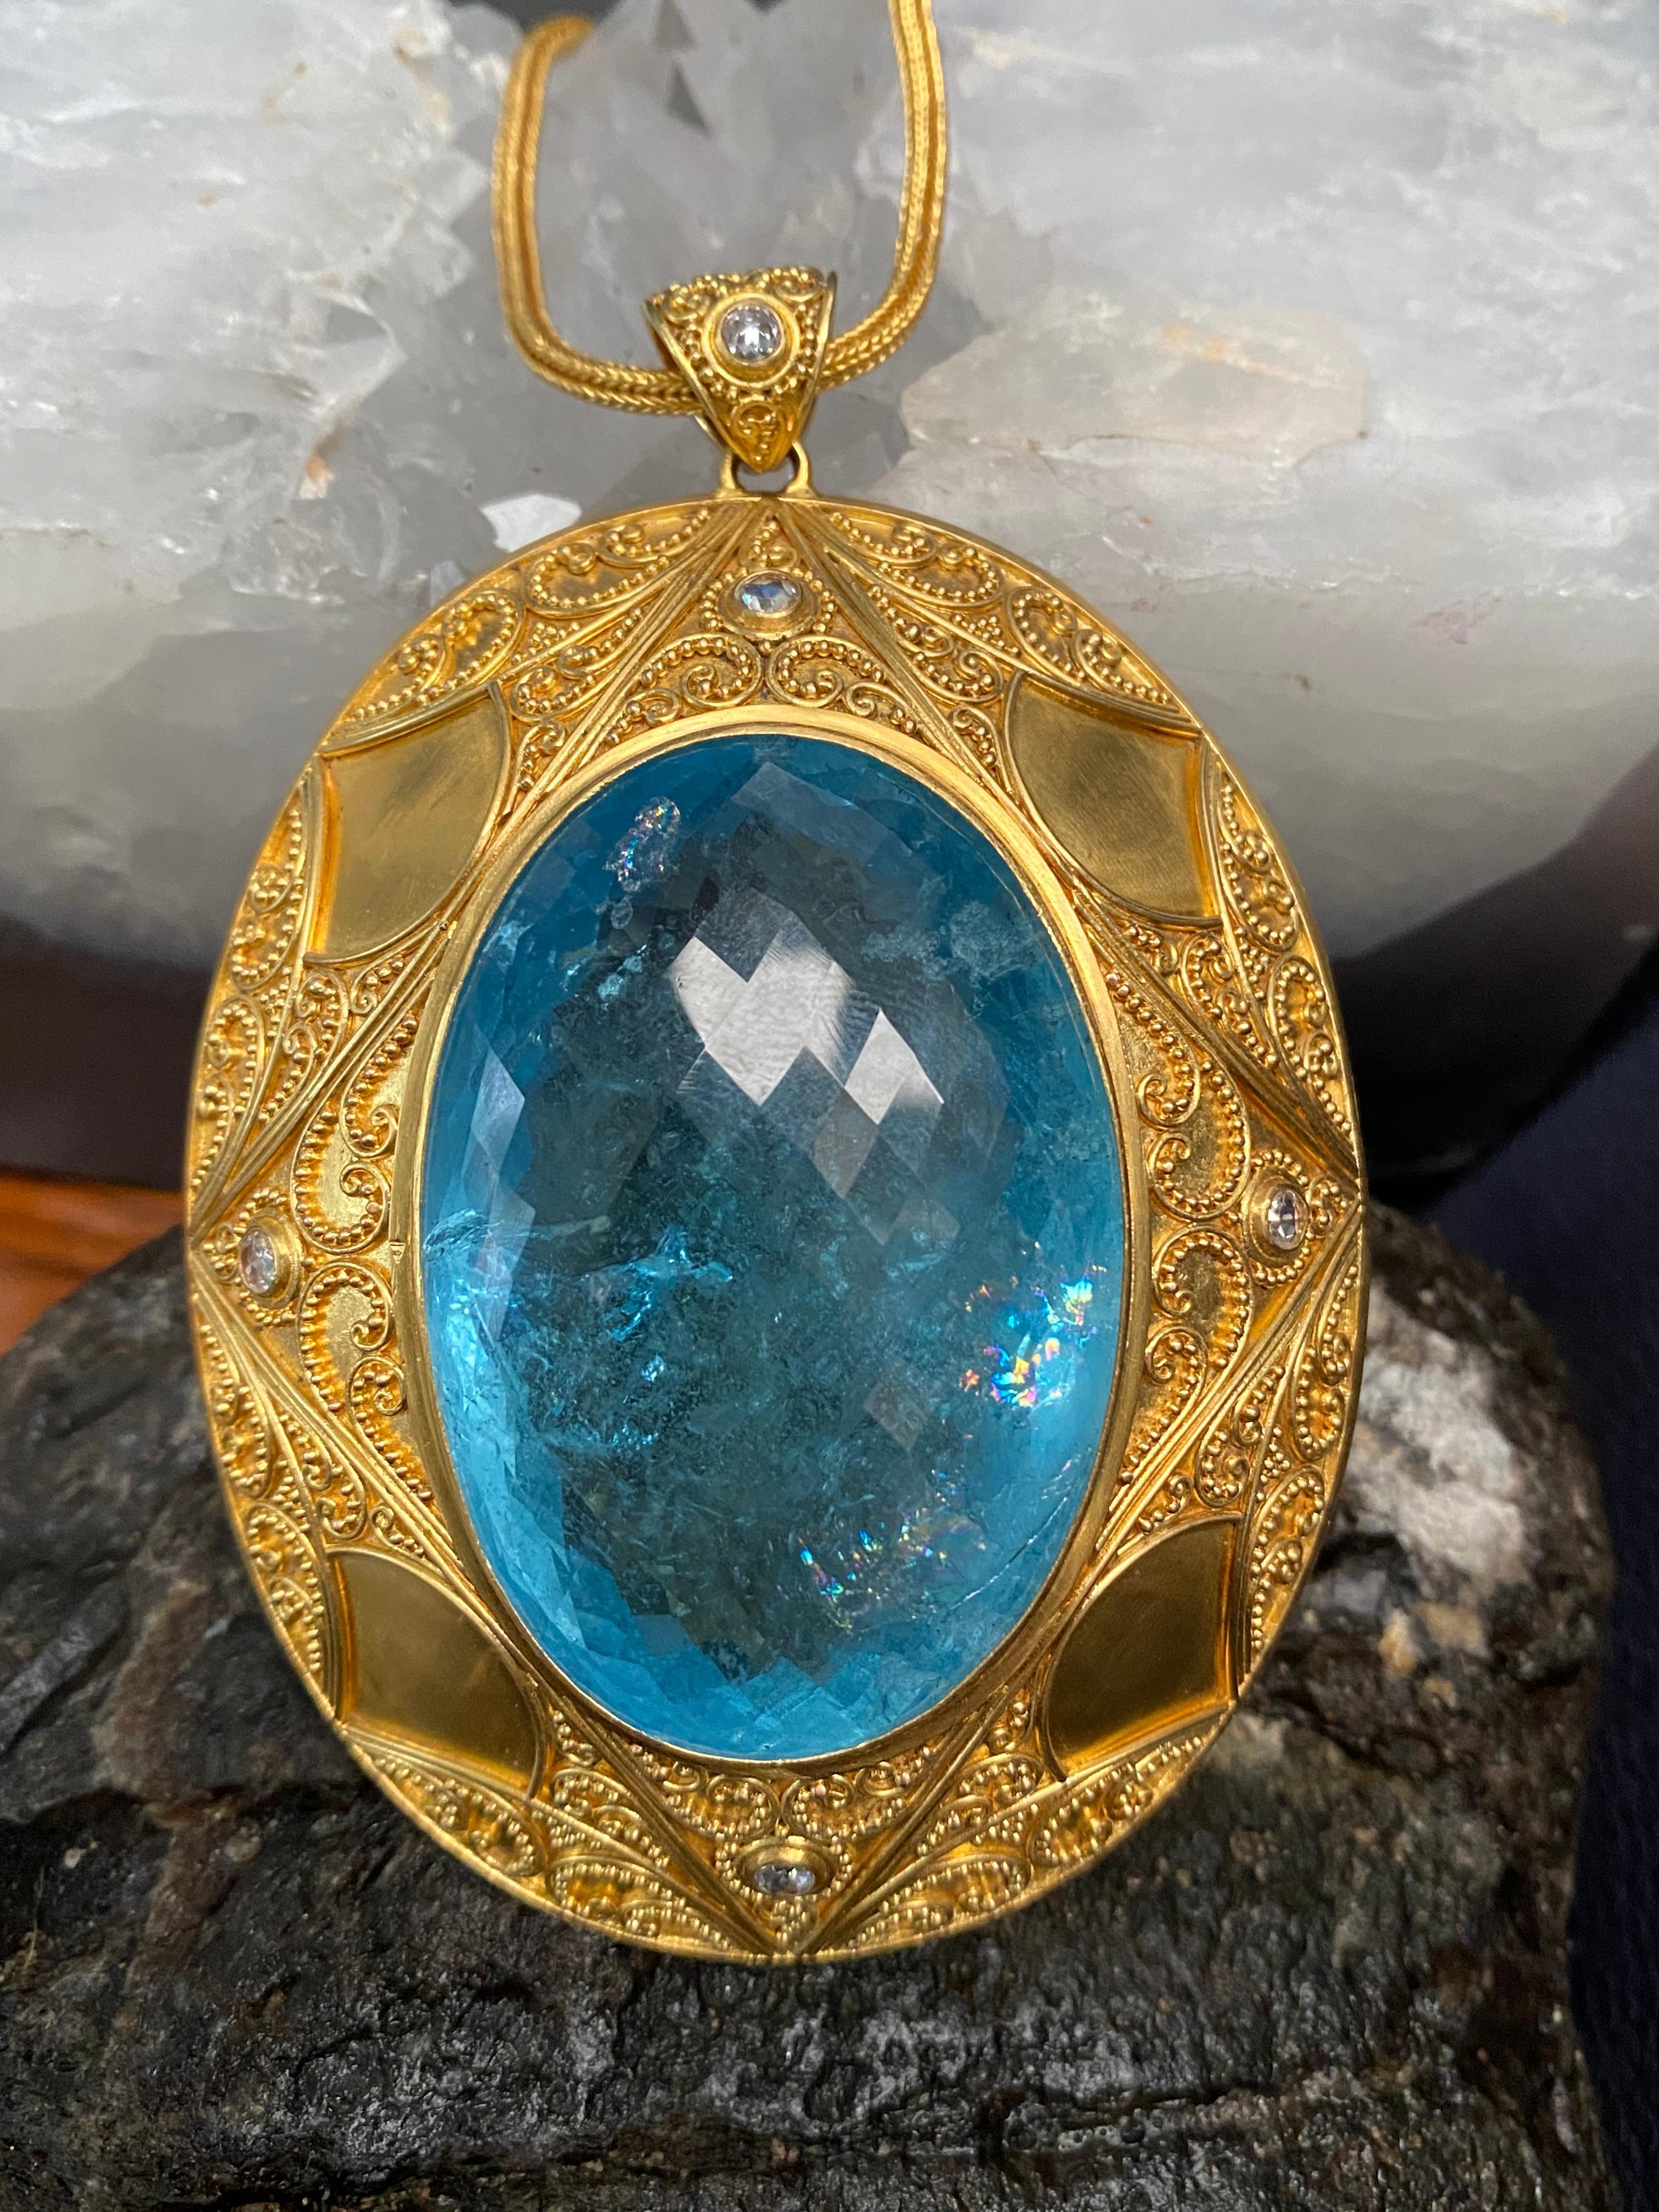 A mesmerizing showstopper Steven Battelle 182.3 Carat Brazilian Aquamarine pendant with five (2mm) VS1 Diamonds set in 22K. Several weeks of painstaking wire work and granulation by our top master goldsmith. The finest quality gold work!  A piece